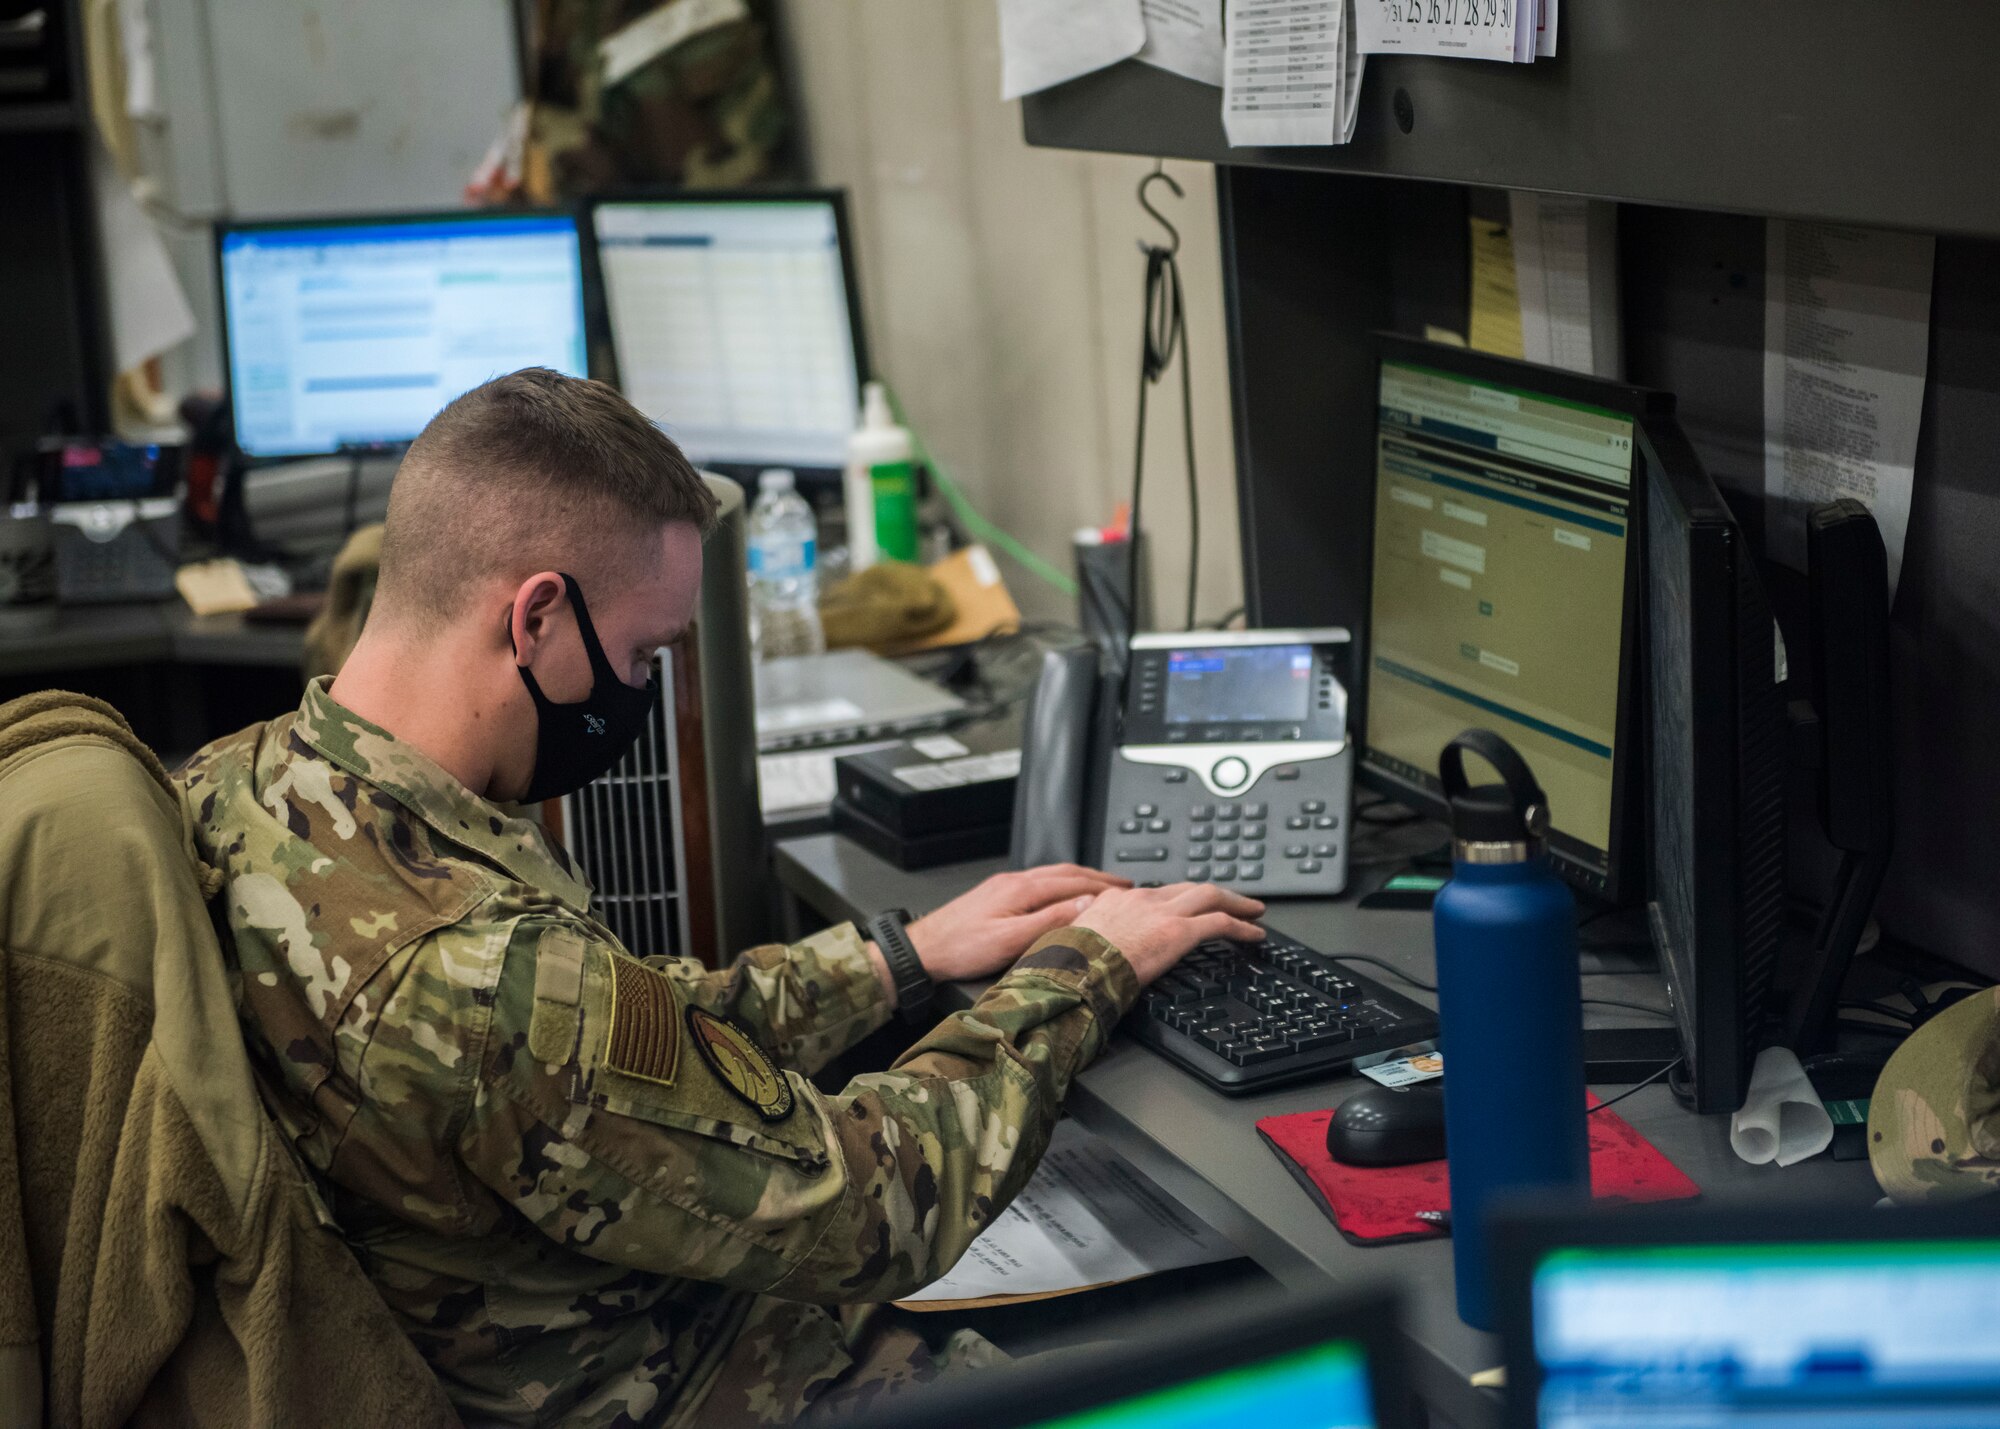 Man in uniform sitting at a desk typing on a computer